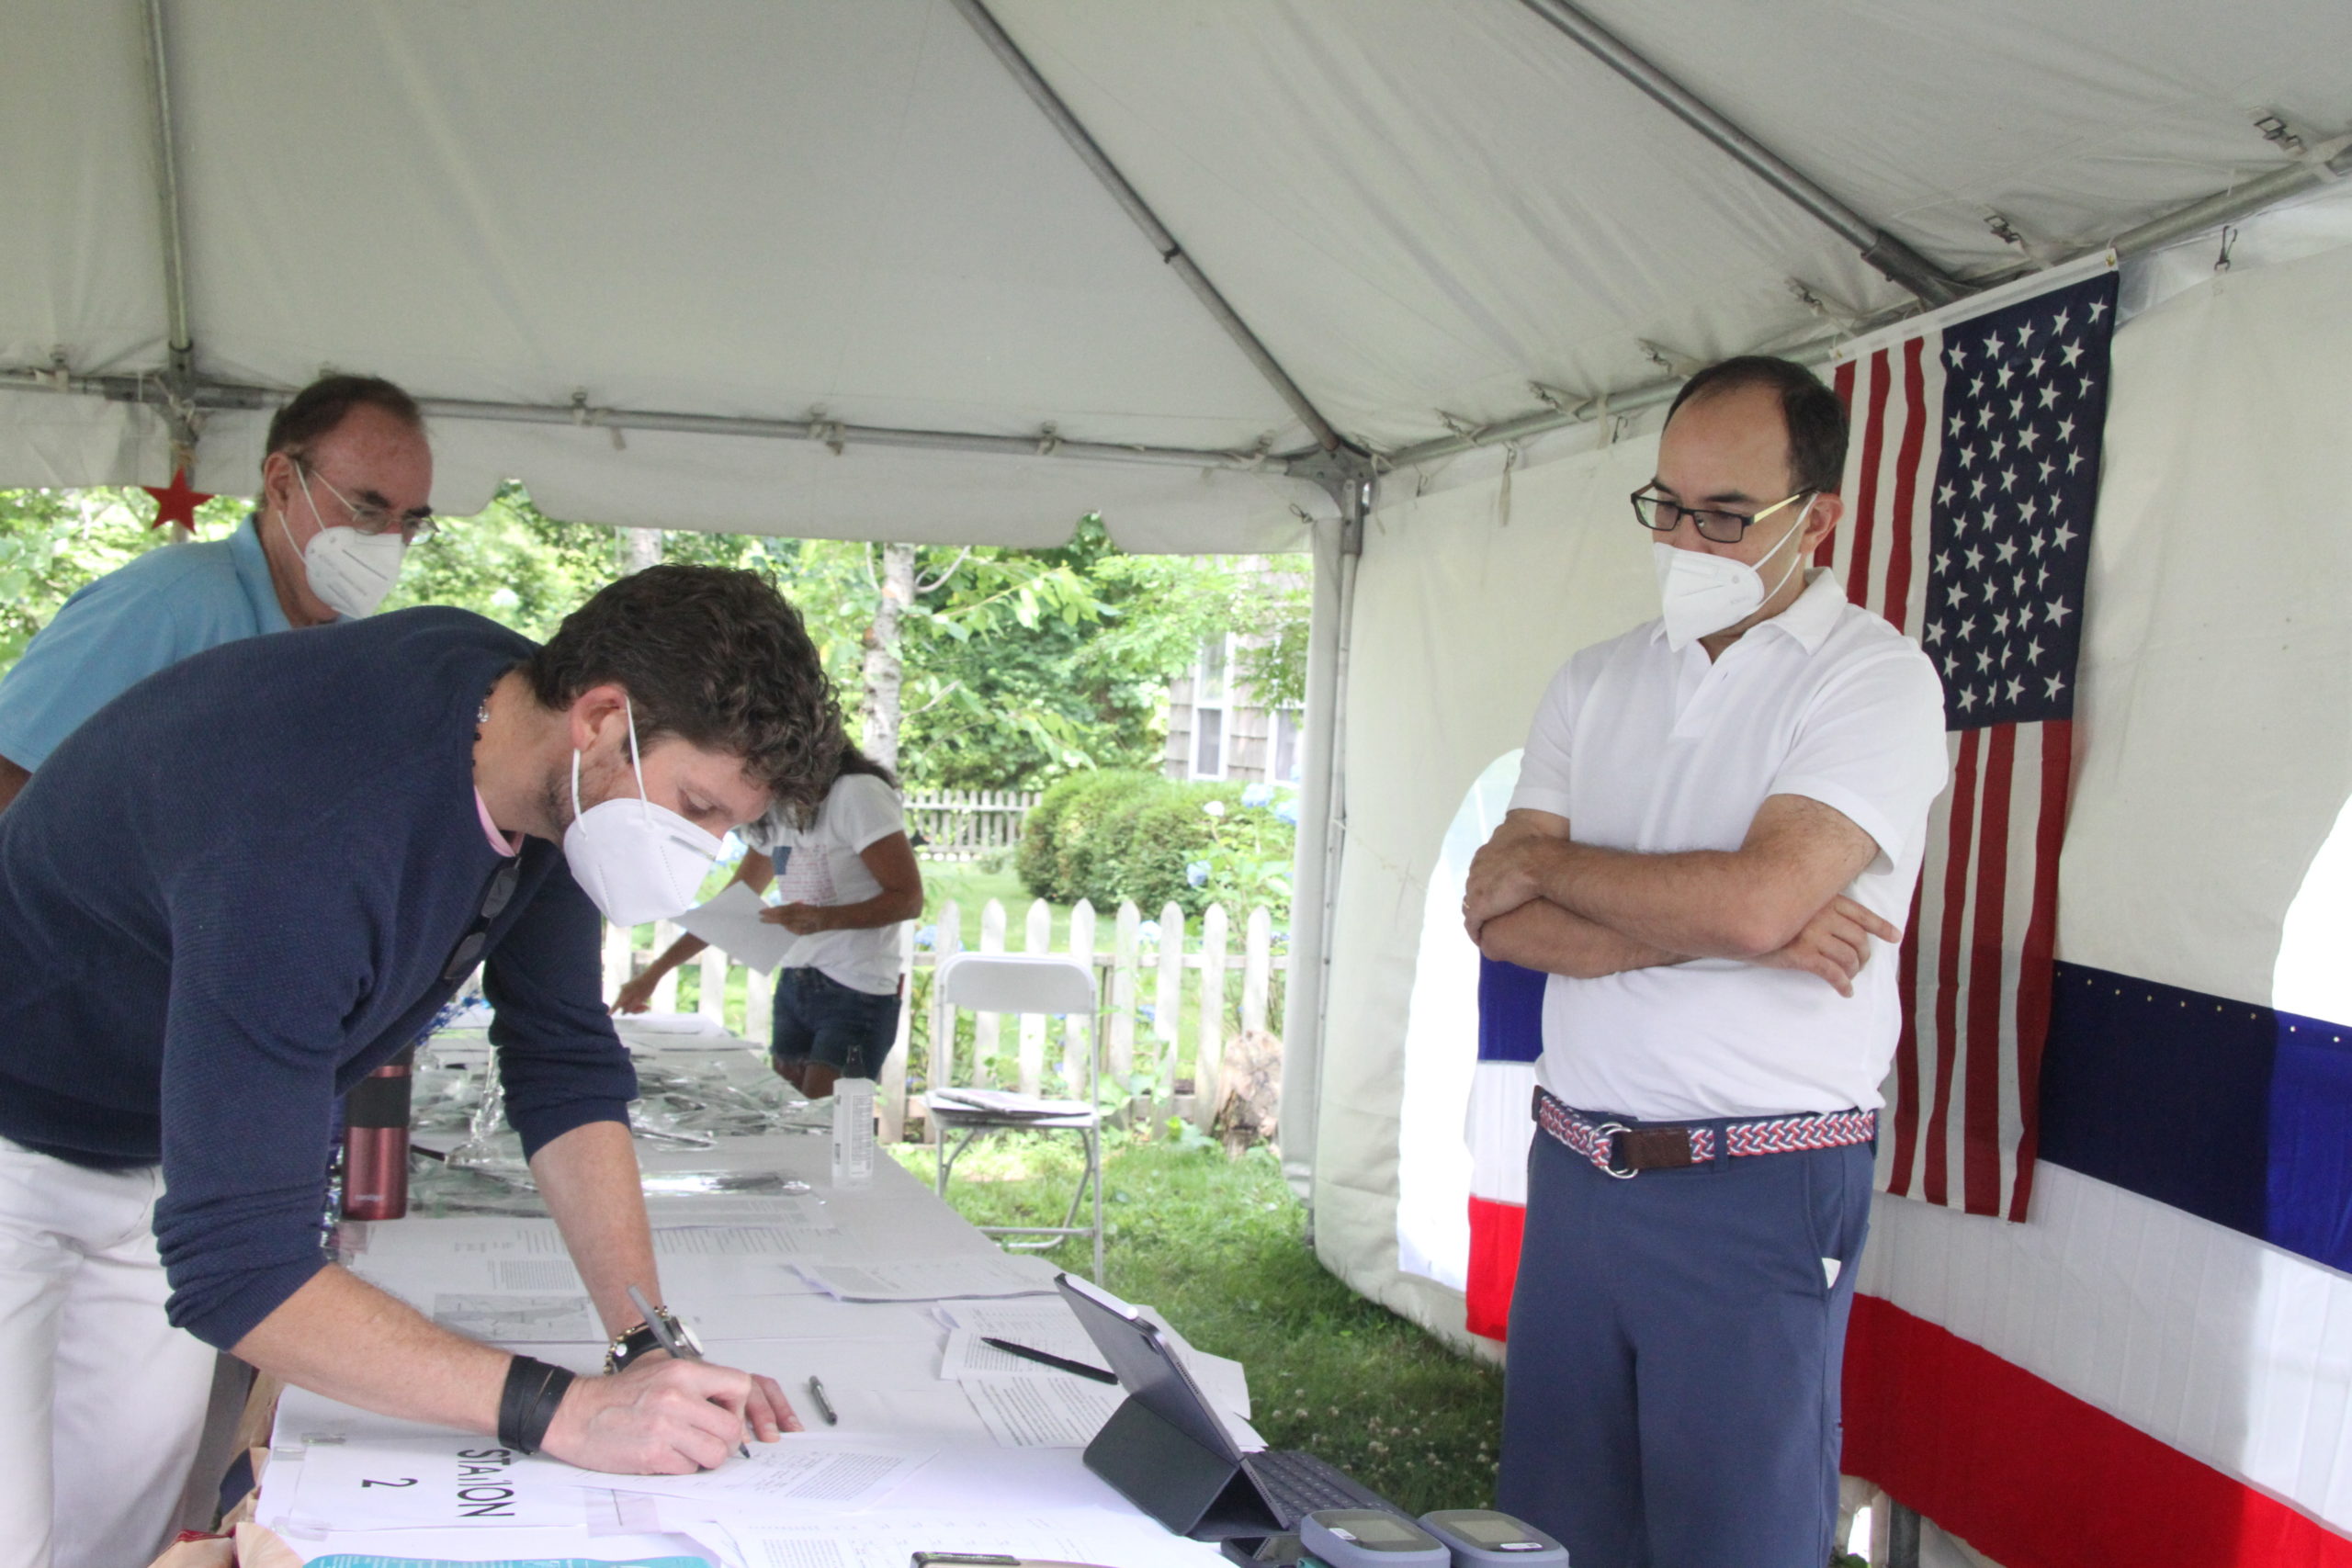 Citizens for the Preservation of Wainscott co-founder Alexander Edlich, right, looked on as Wainscott resident Simon Kinsella signed the petition to call for an incorporation vote. 